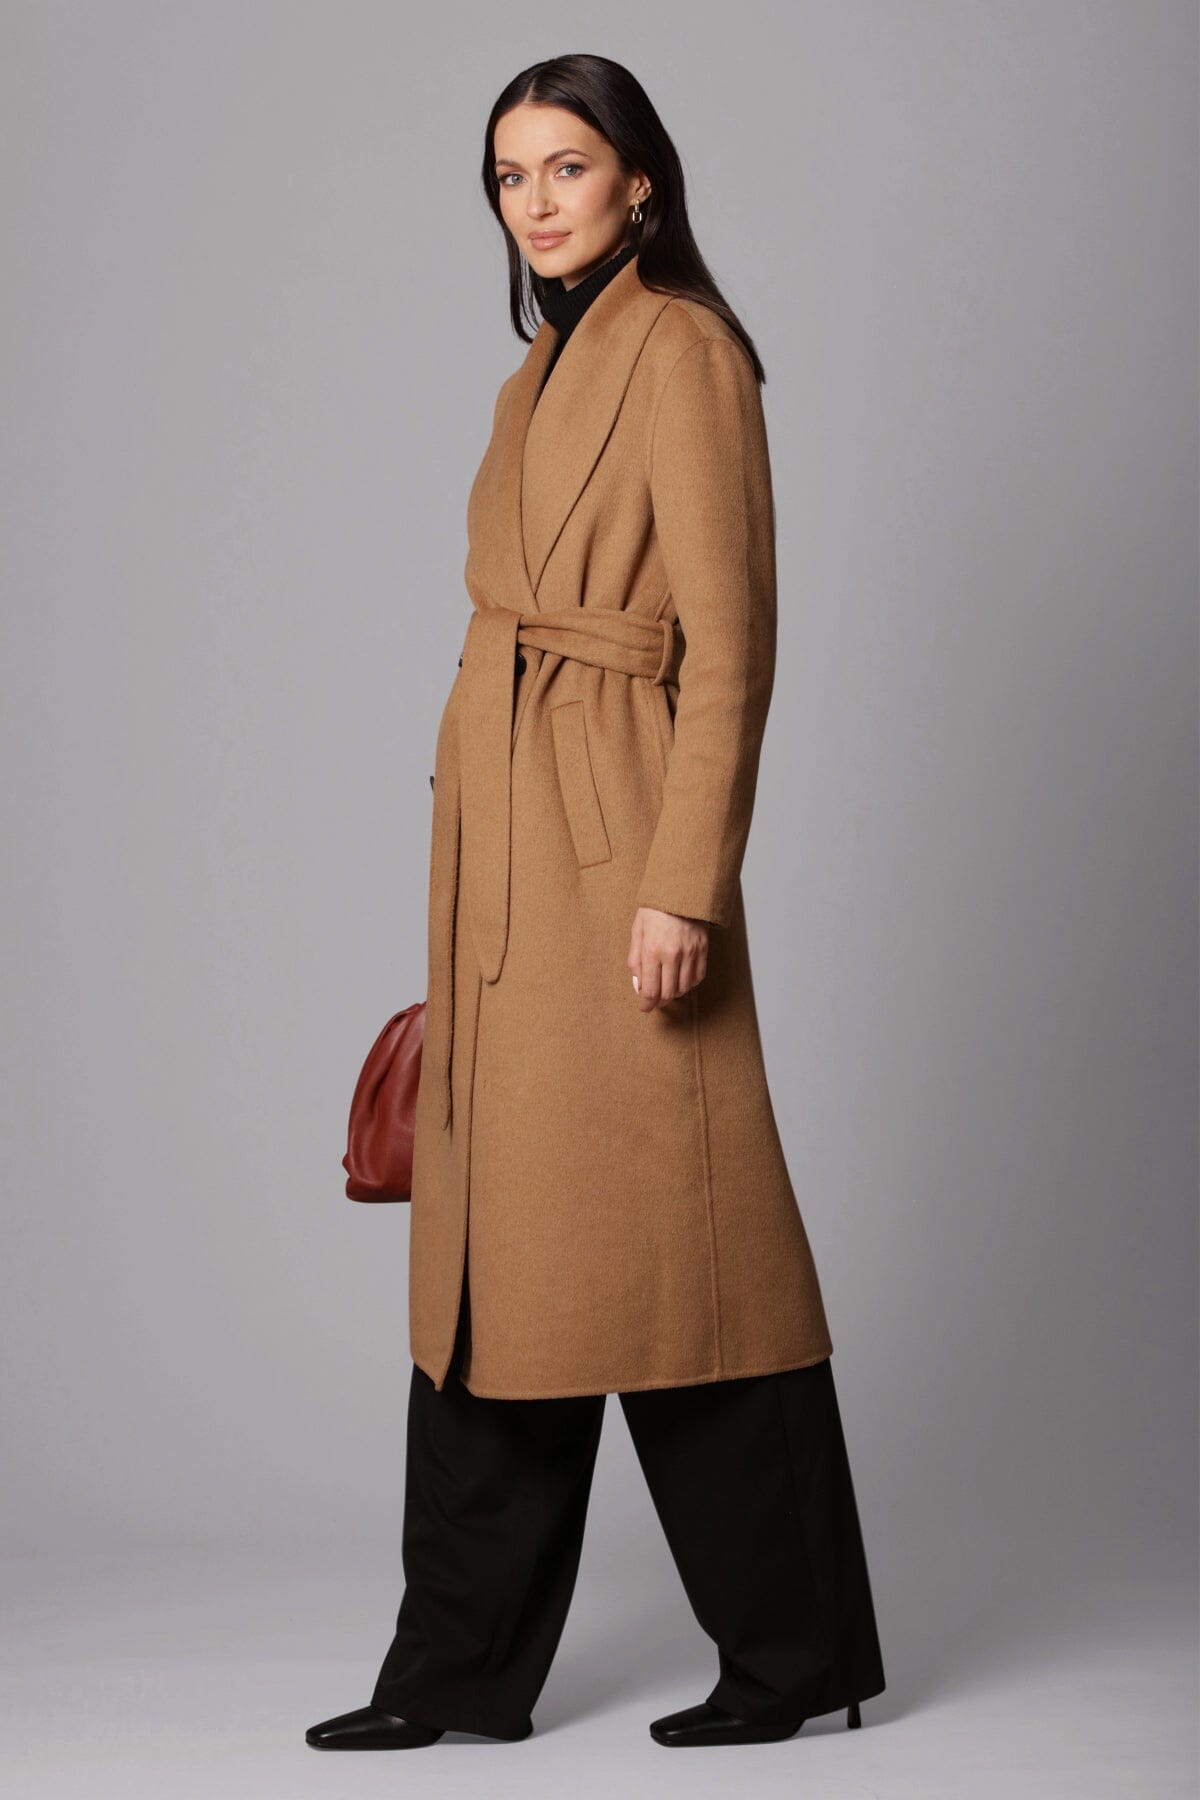 camel brown double face wrap mid length coat - women's figure flattering office to date night outerwear